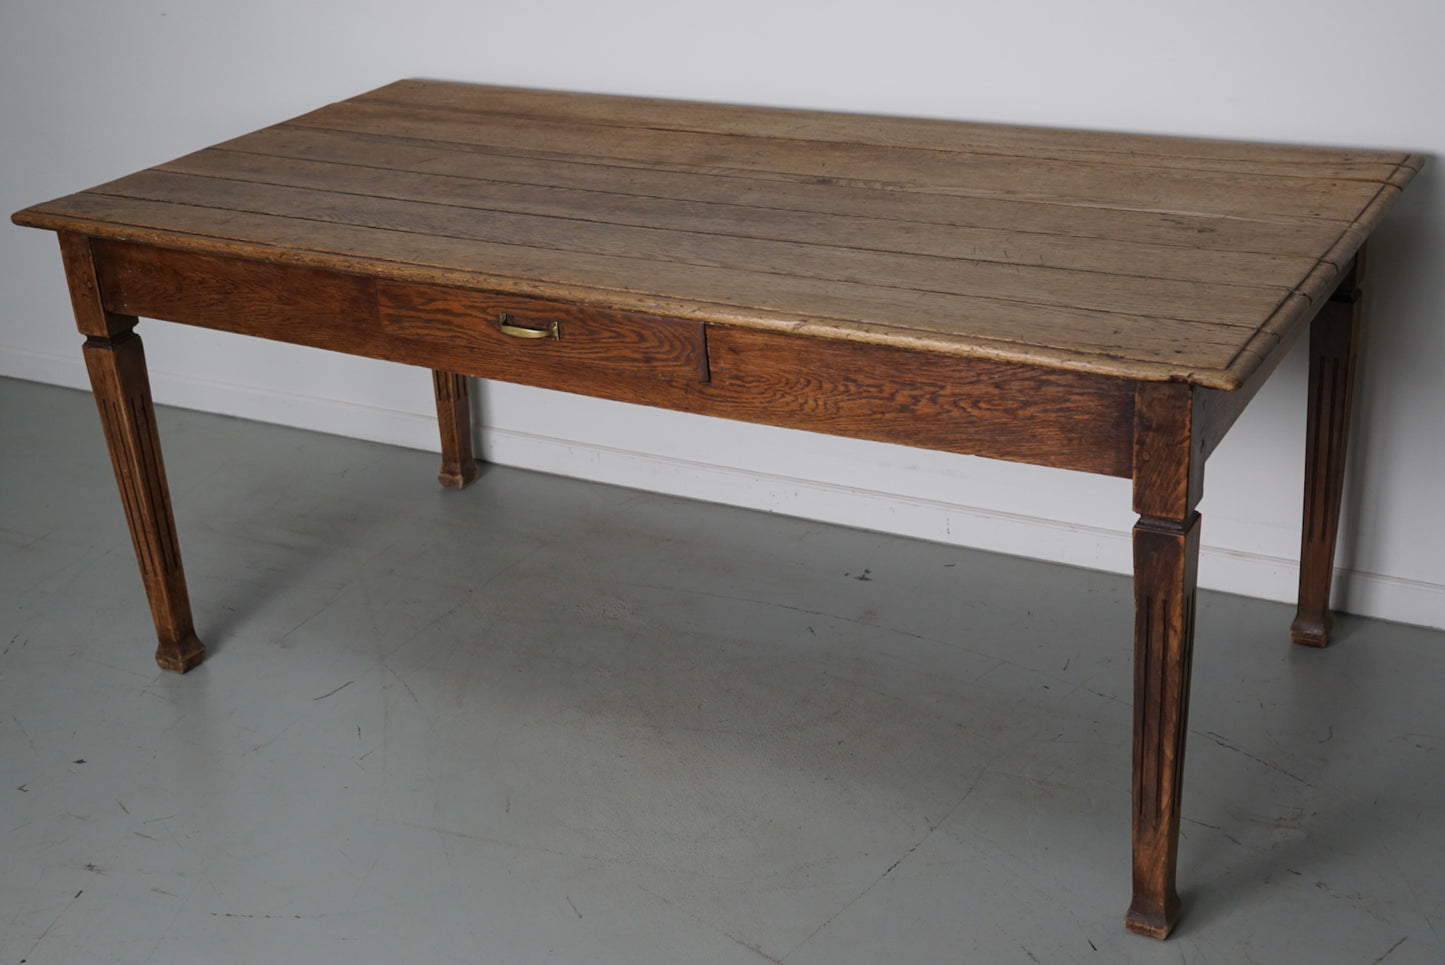 Rustic Dutch Greyed Oak Art Deco Style Dining Table, 1920/30s